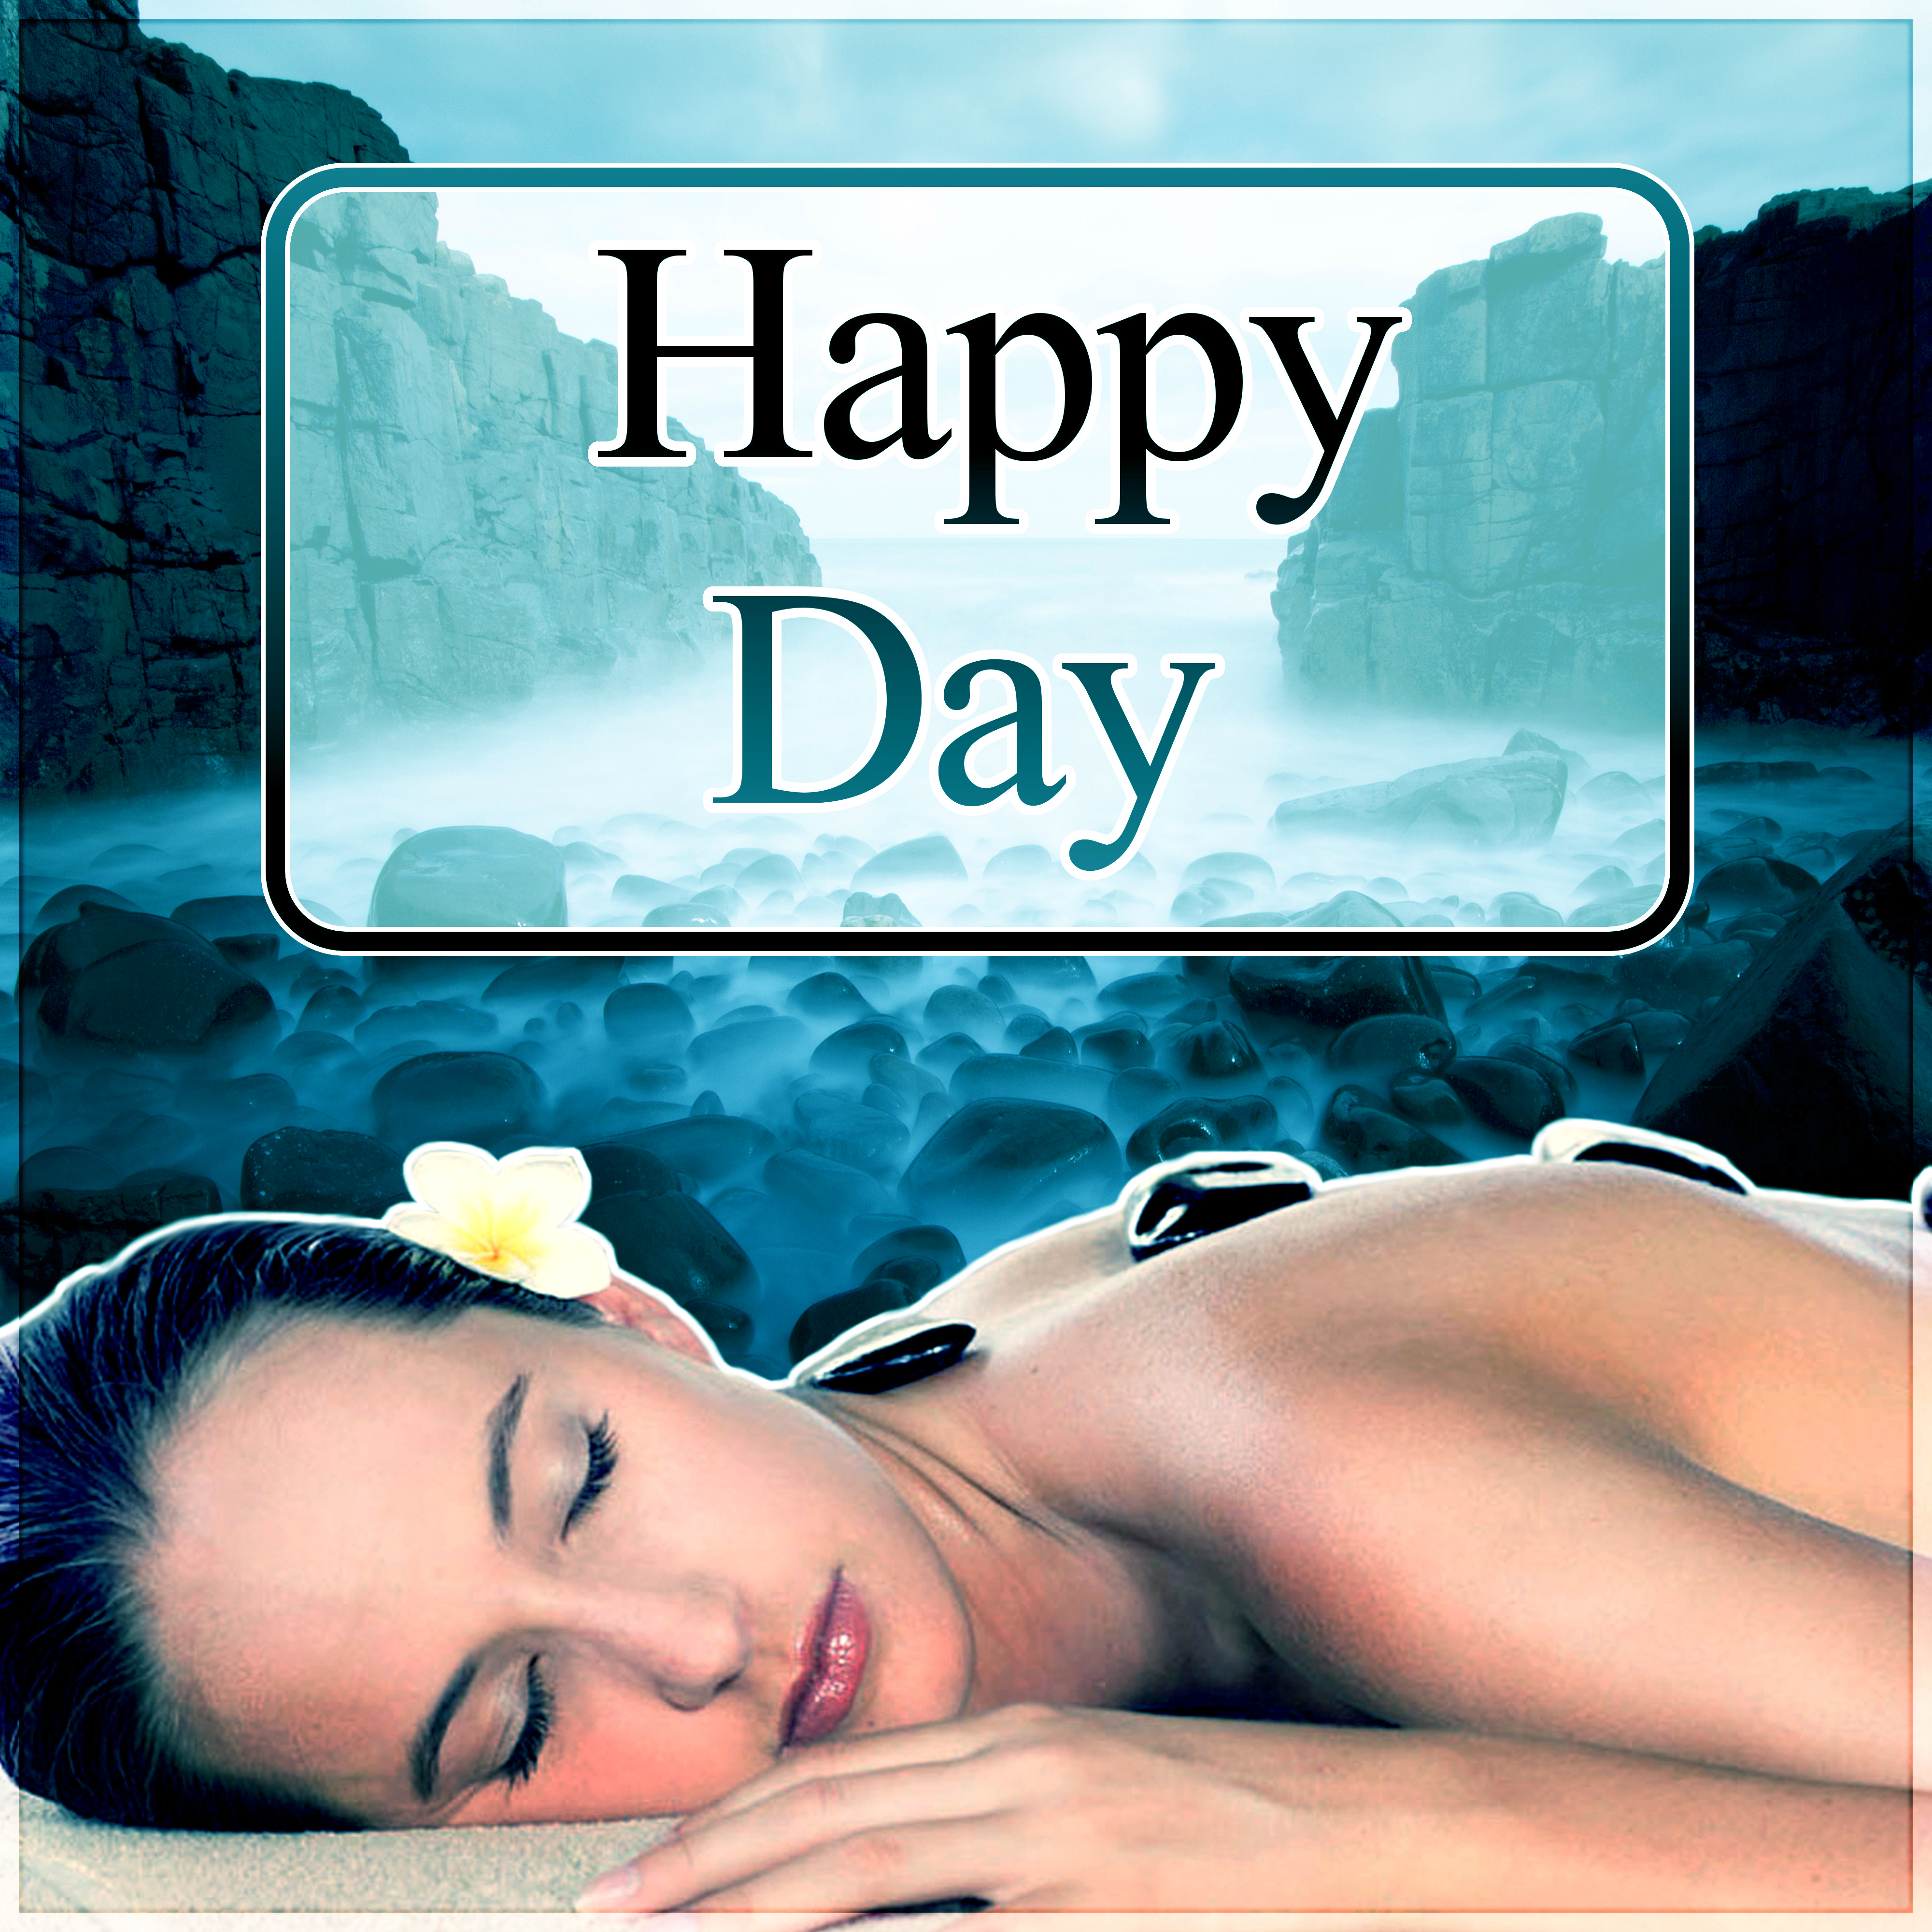 Happy Day - Luxury Spa, Elixir of Life, Relaxing Background Music for Spa the Wellness Center, Natural Music for Healing Through Sound and Touch, Tranquility Spa & Total Relax, Sensitive Massage